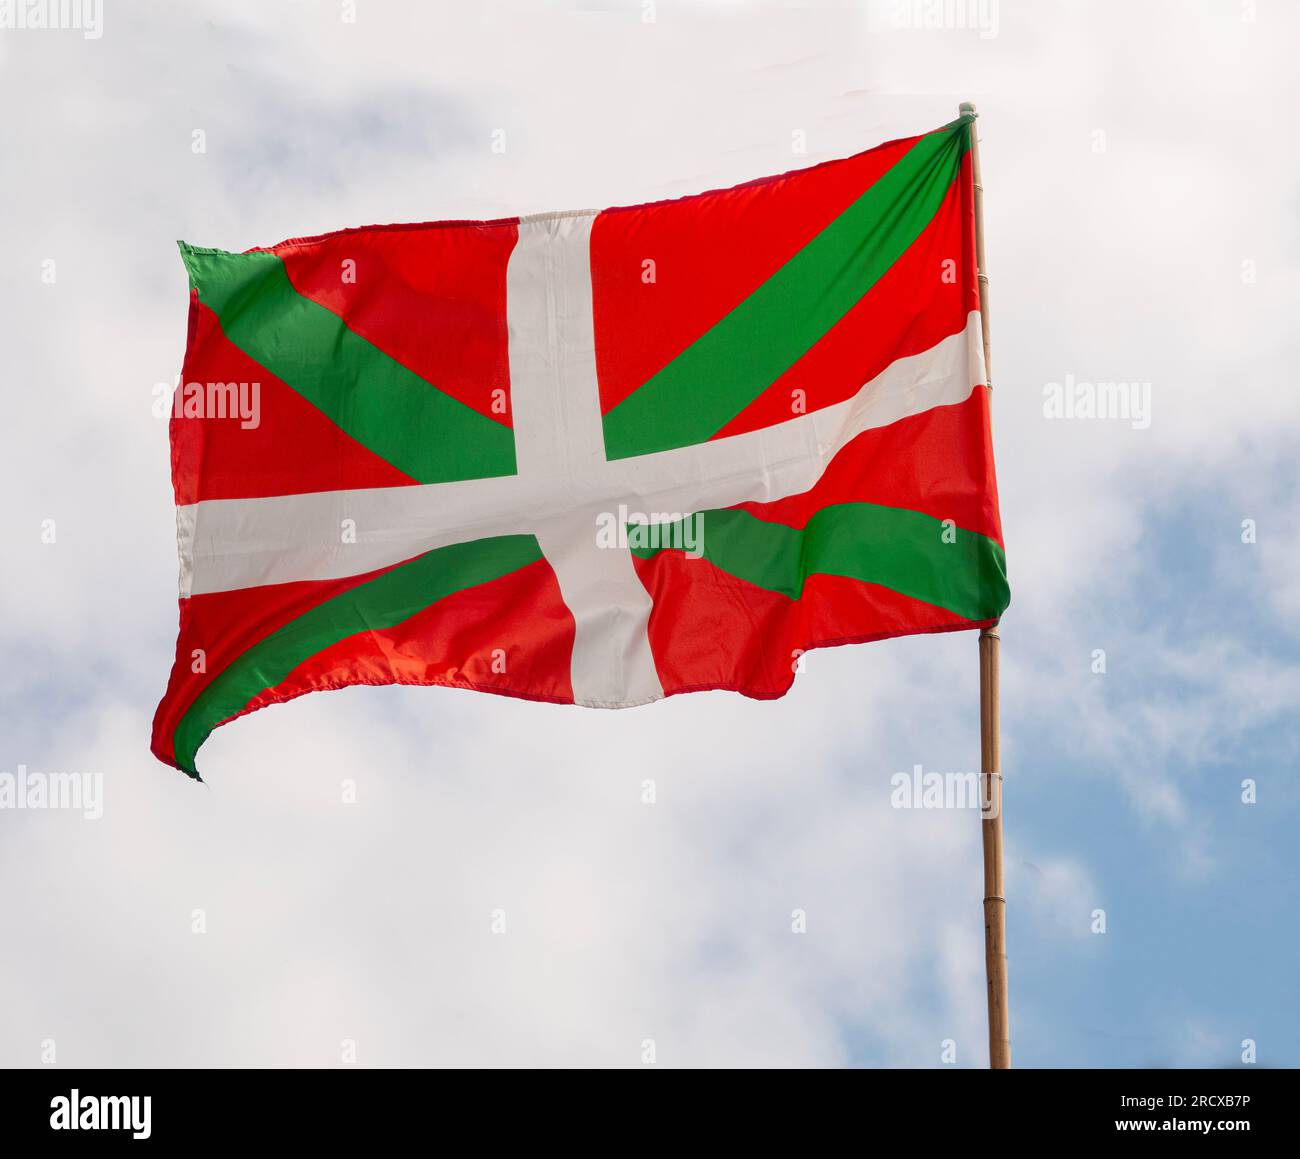 Pays Basque Region flag. The Basque Country flag waving on a flagpole. Autonomous community in northern Spain. Stock Photo